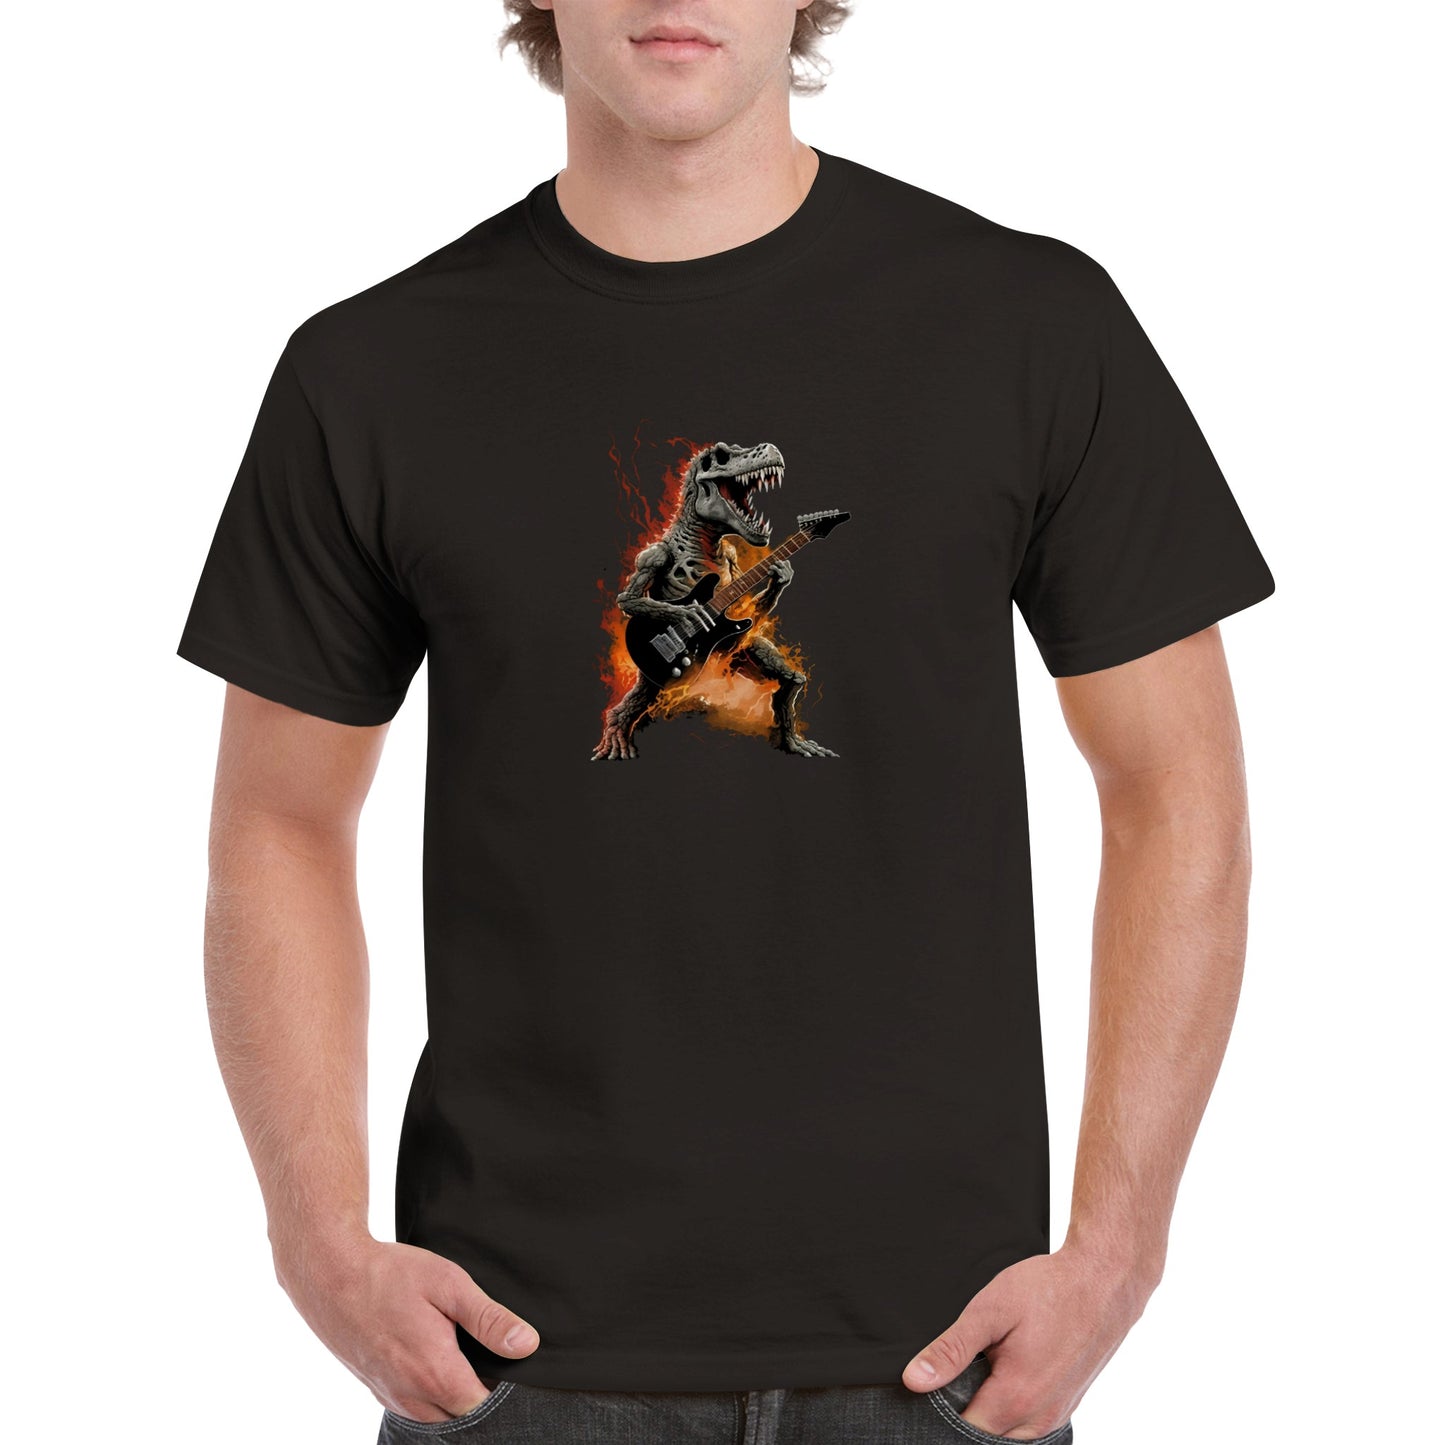 Rock Out in Style with the T-Rex Skeleton on Fire Playing Guitar Heavyweight Unisex Crewneck T-Shirt